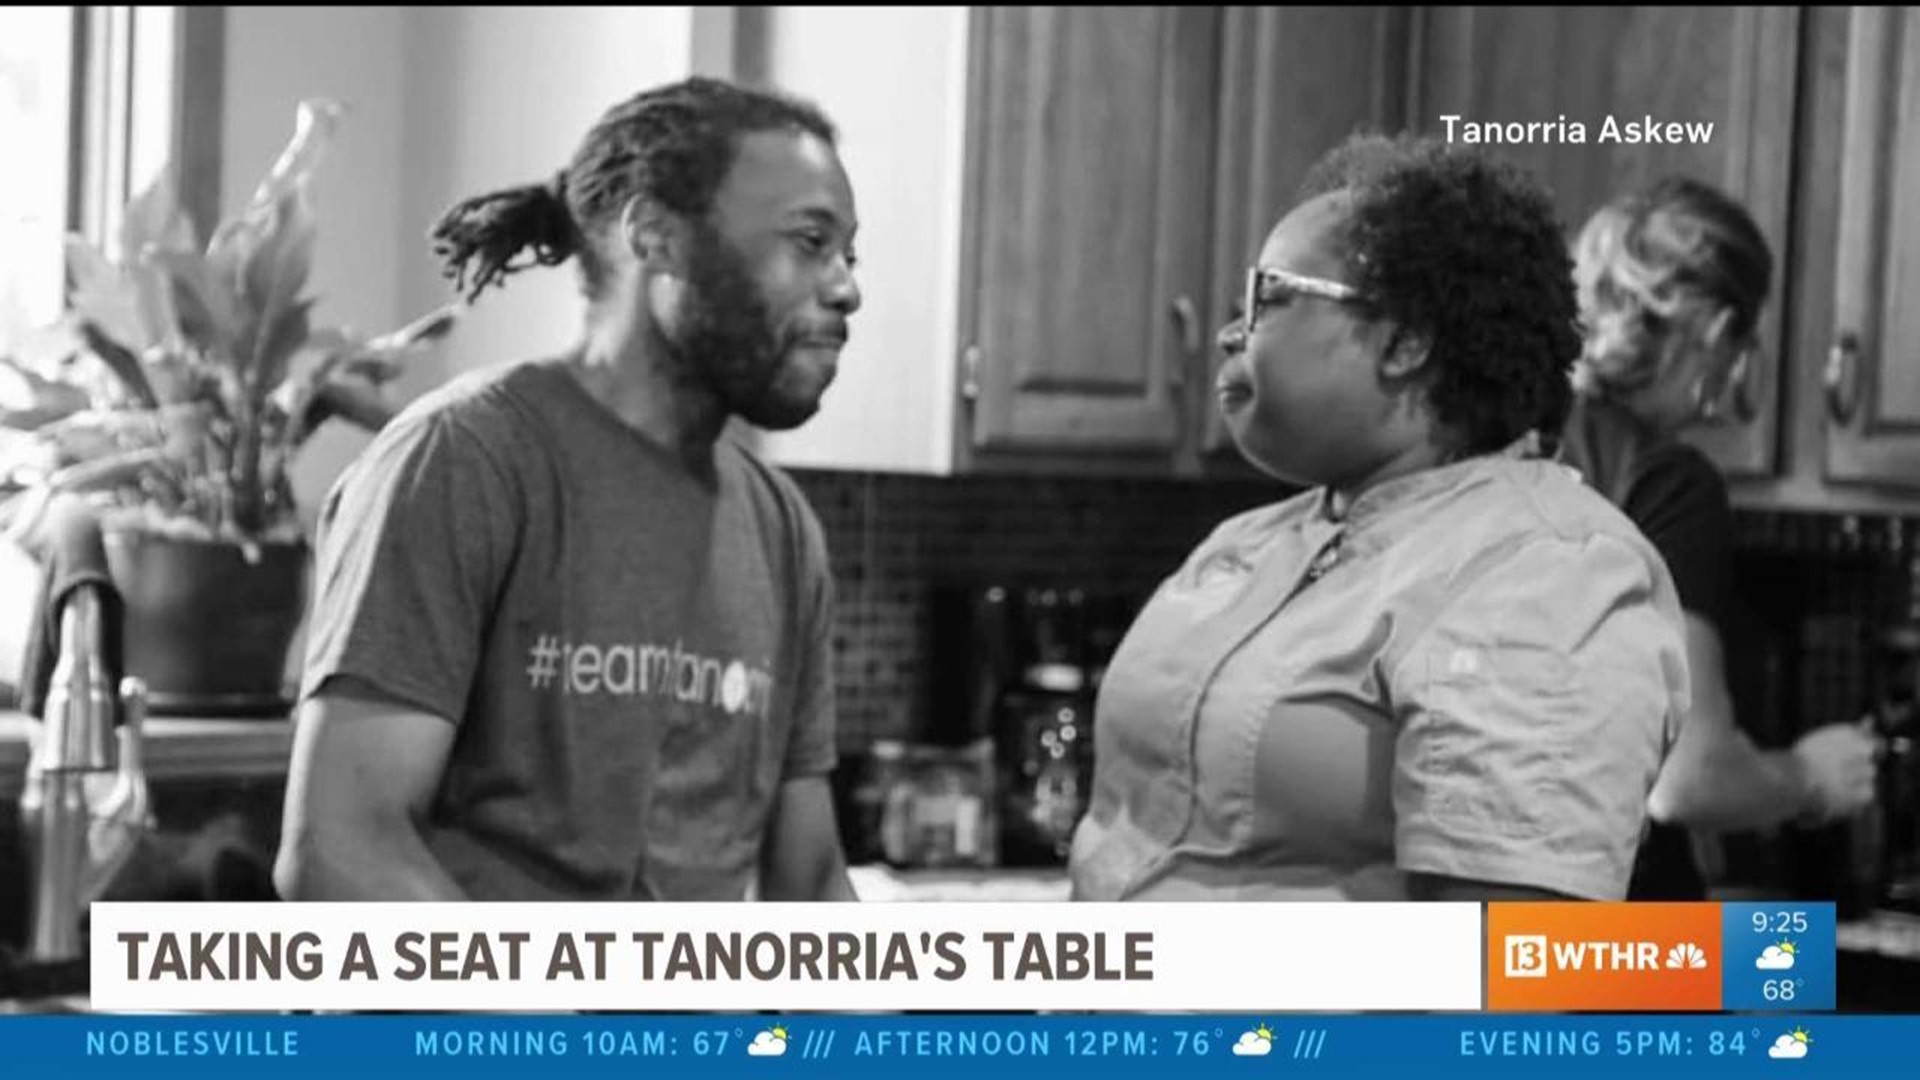 Taking a seat at Tanorria's Table